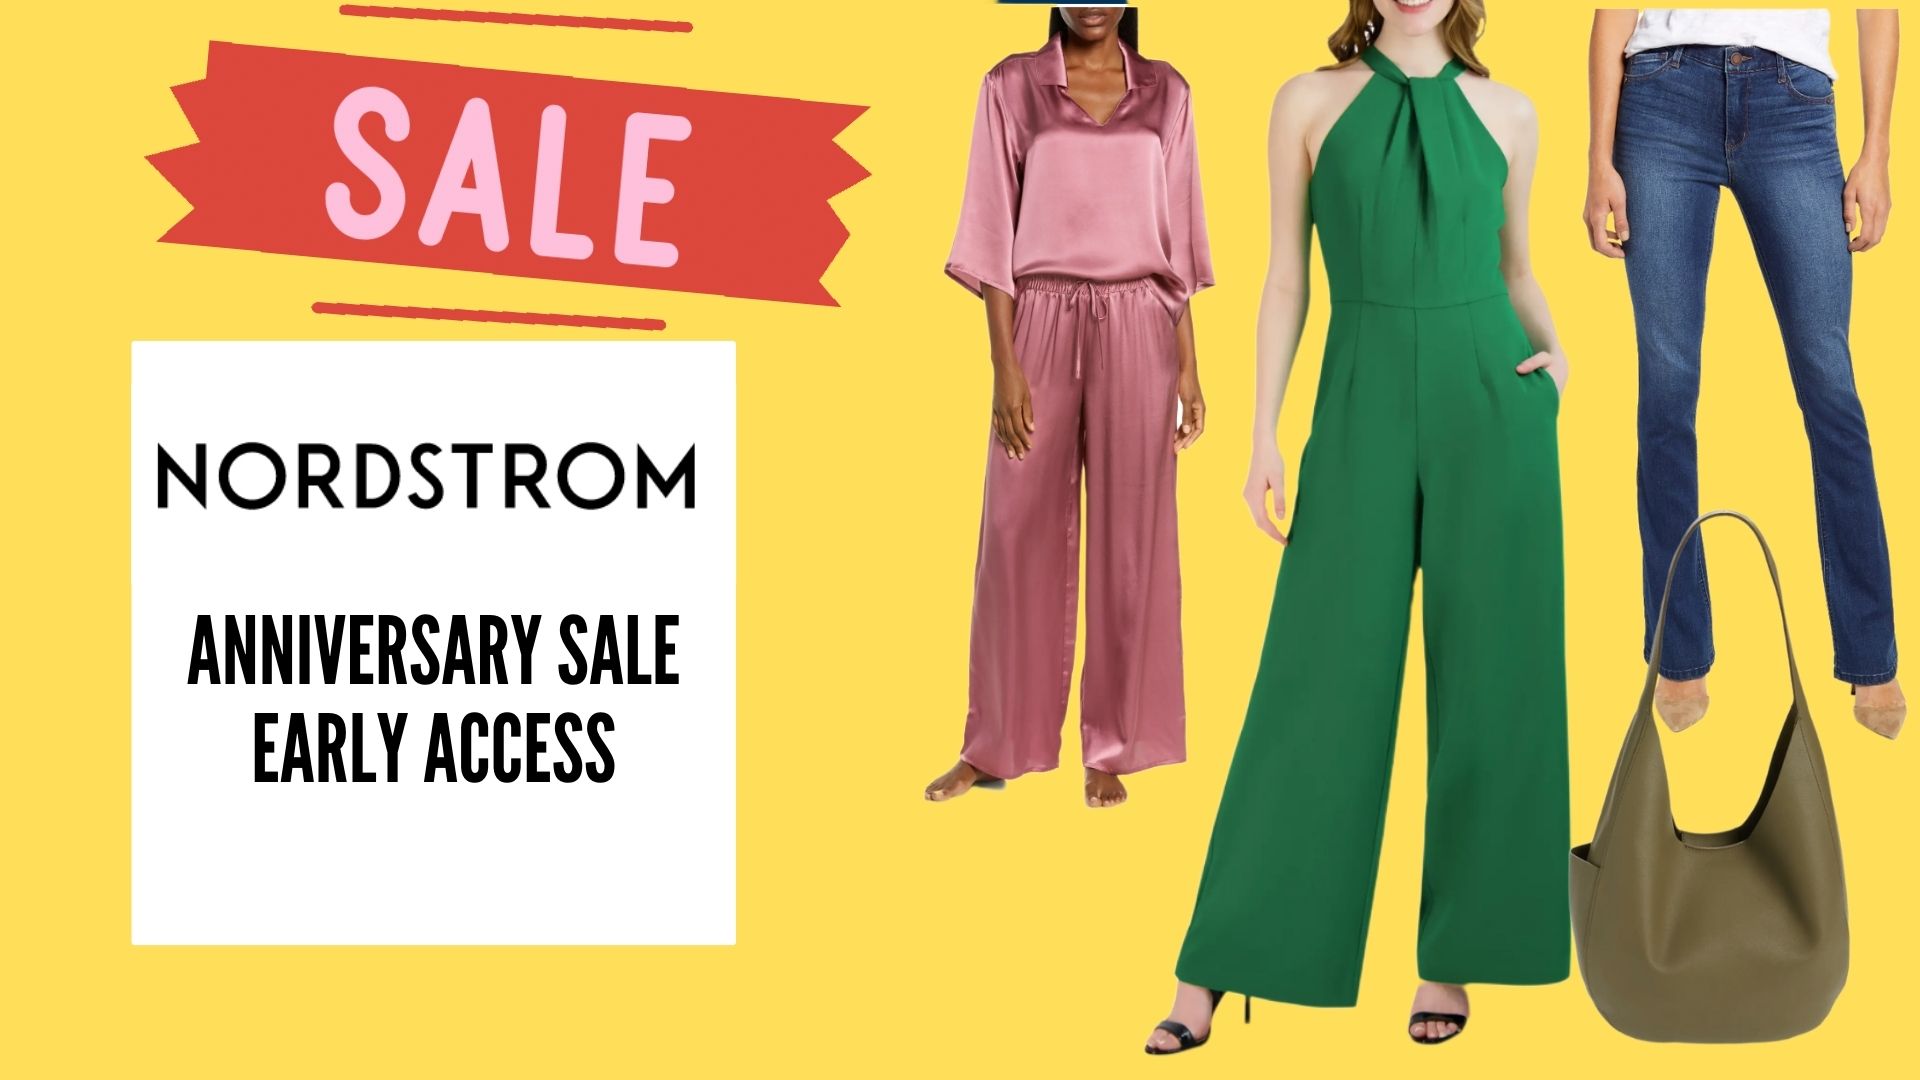 10 Best Early Access Nordstrom Anniversary Sale Deals for 2022 Woman's